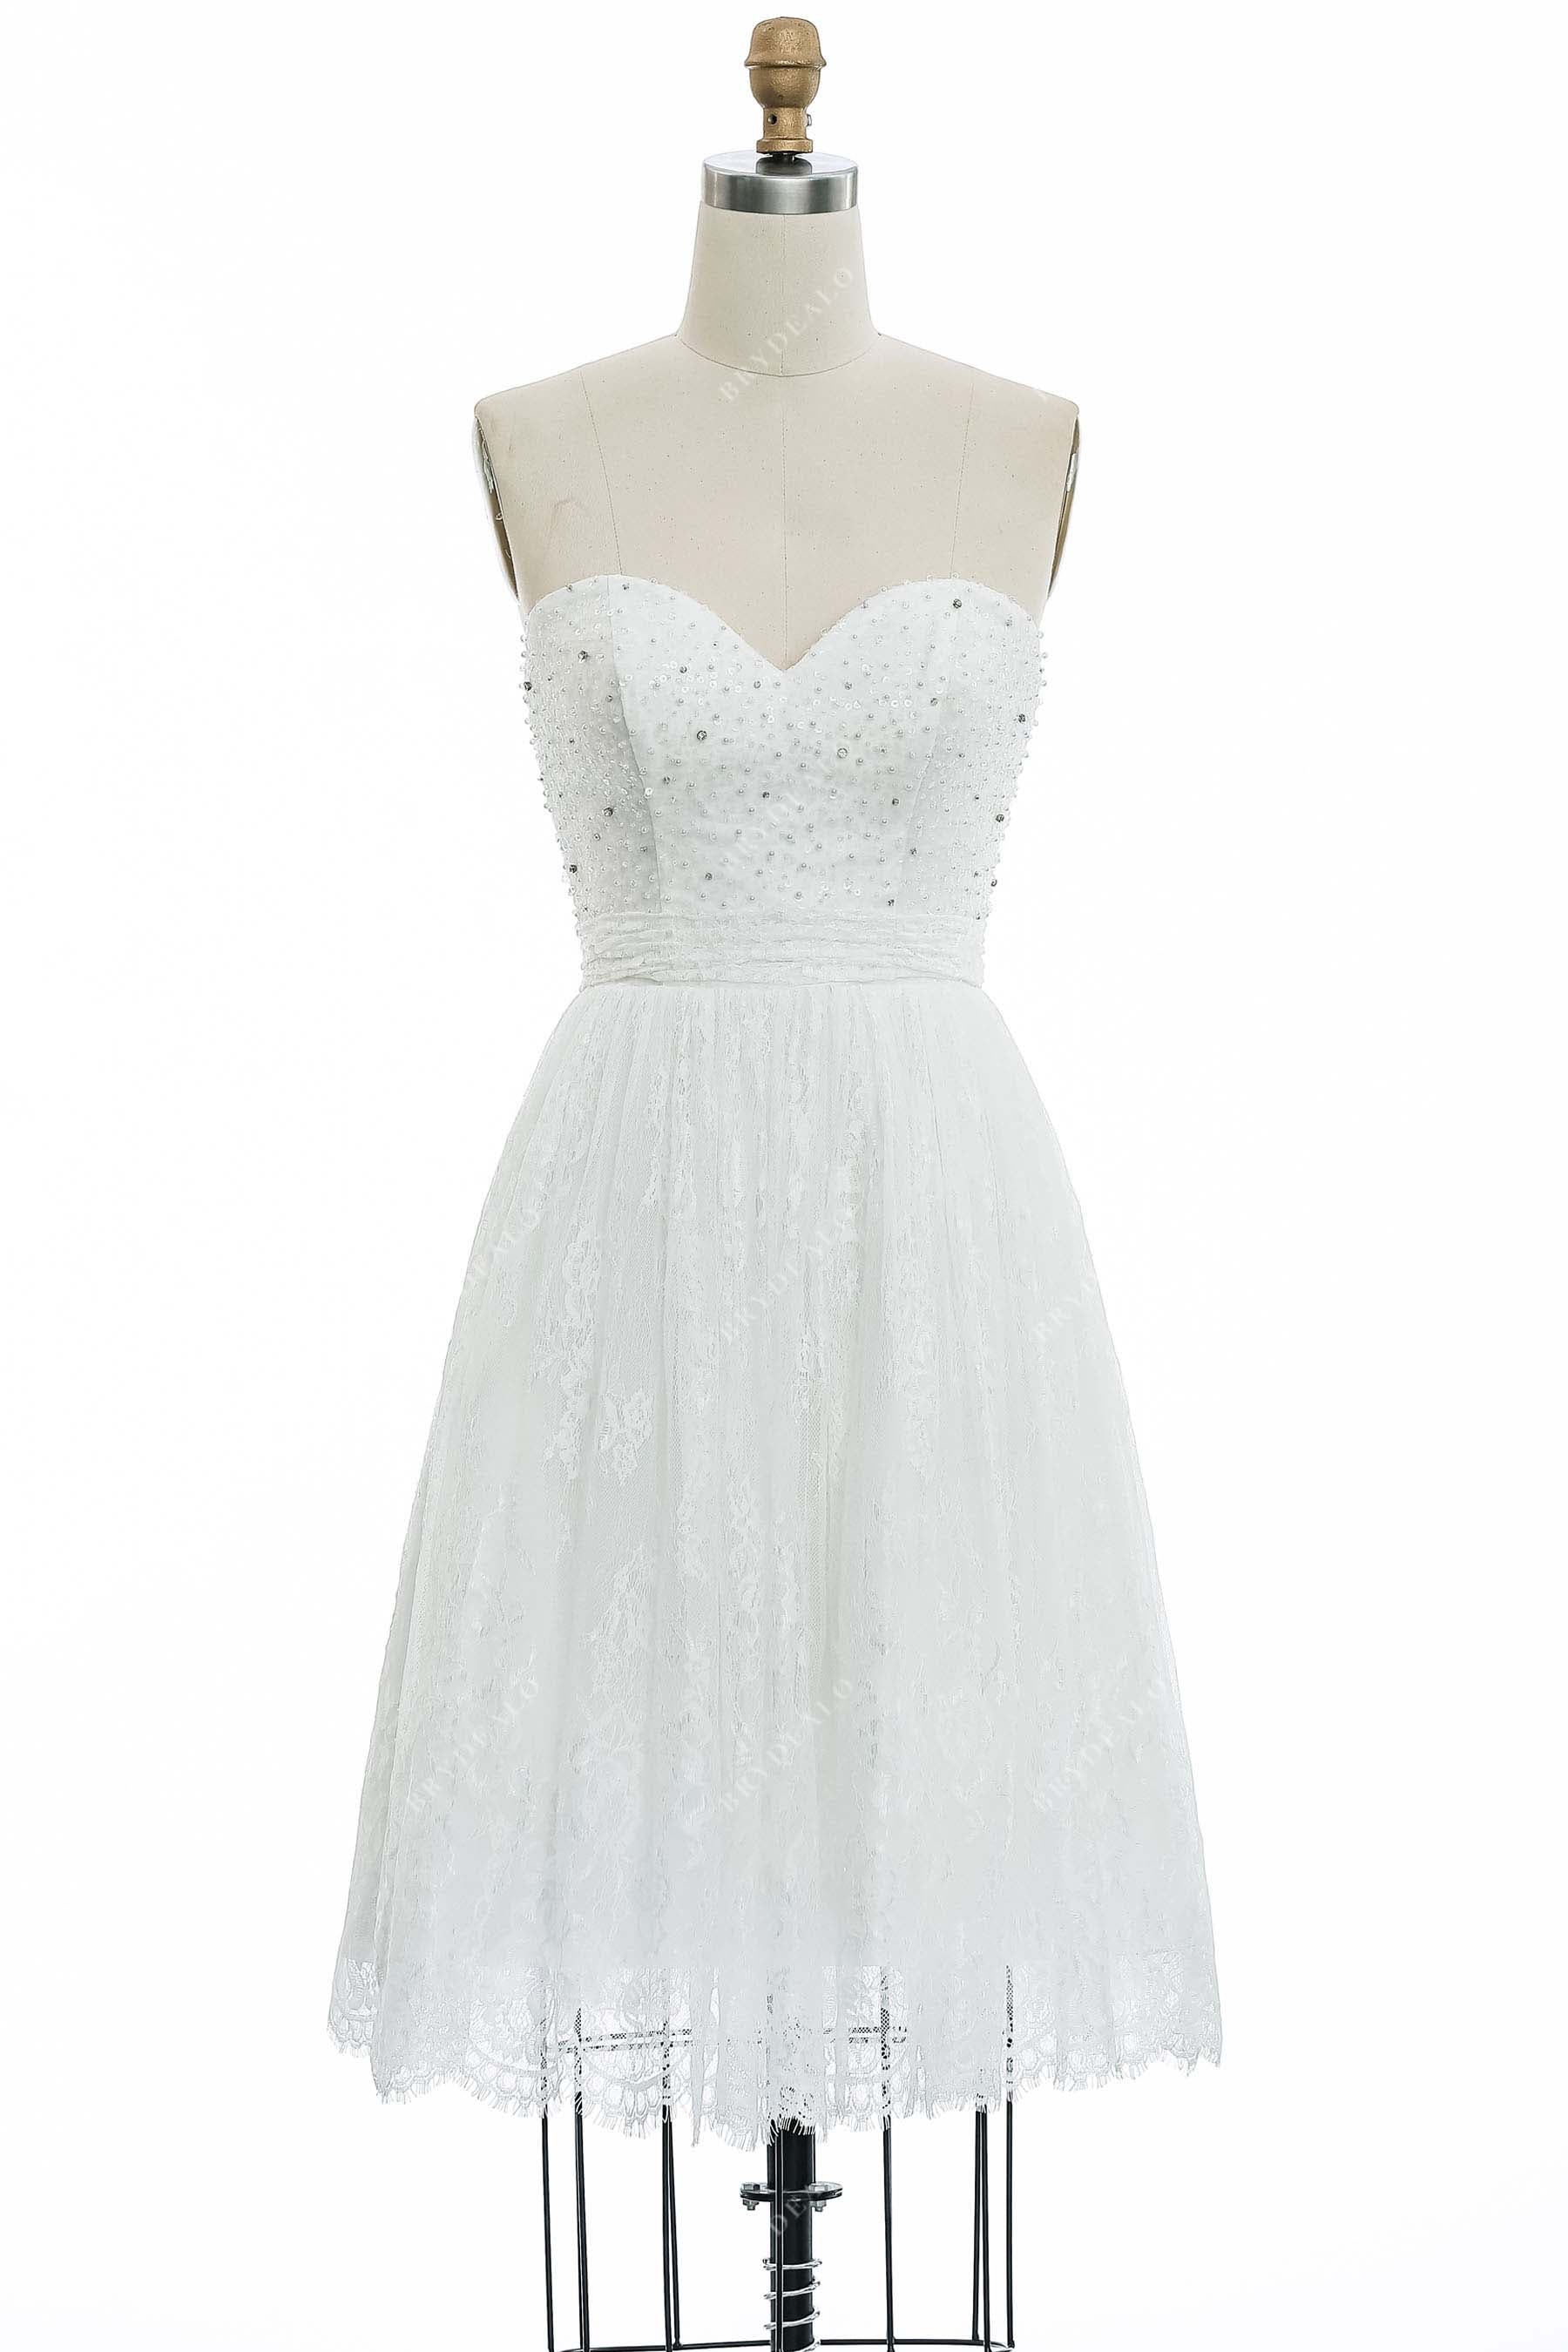 Strapless Sweetheart Neck Casual A-line Short Bridal Gown